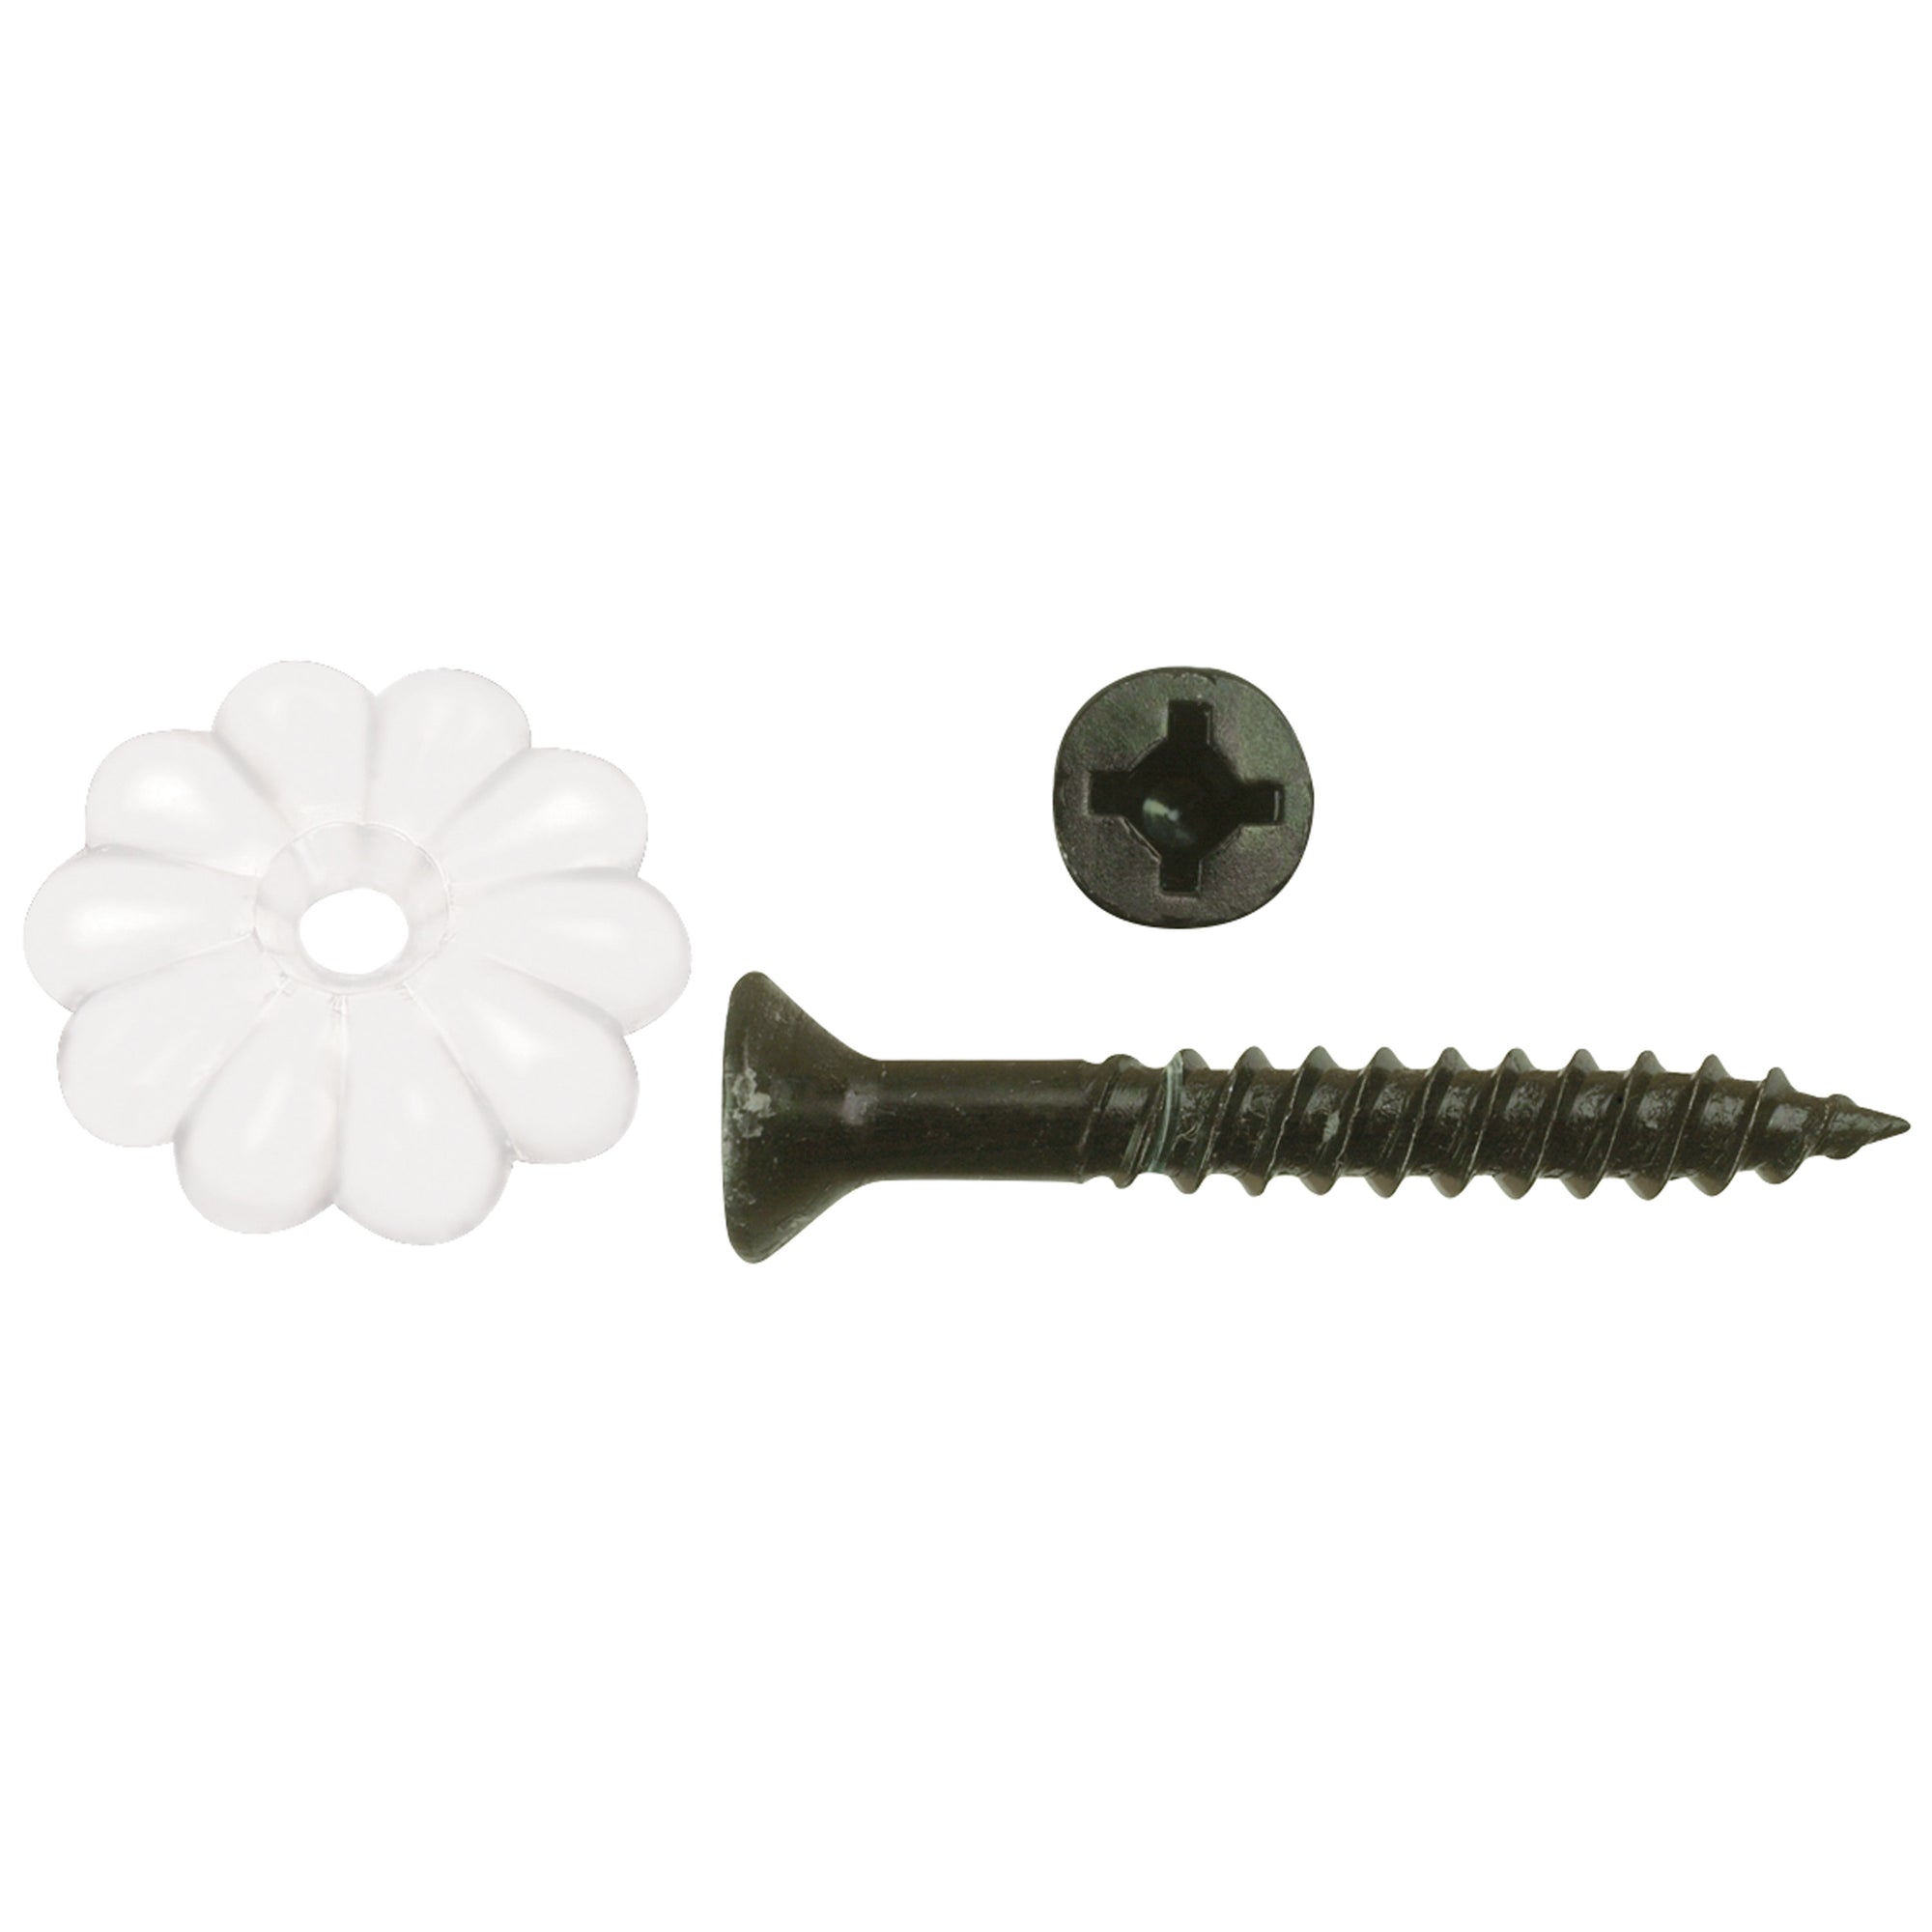 AP Products 012-RTWR100 Rosette and Screw, Pack of 100 - White